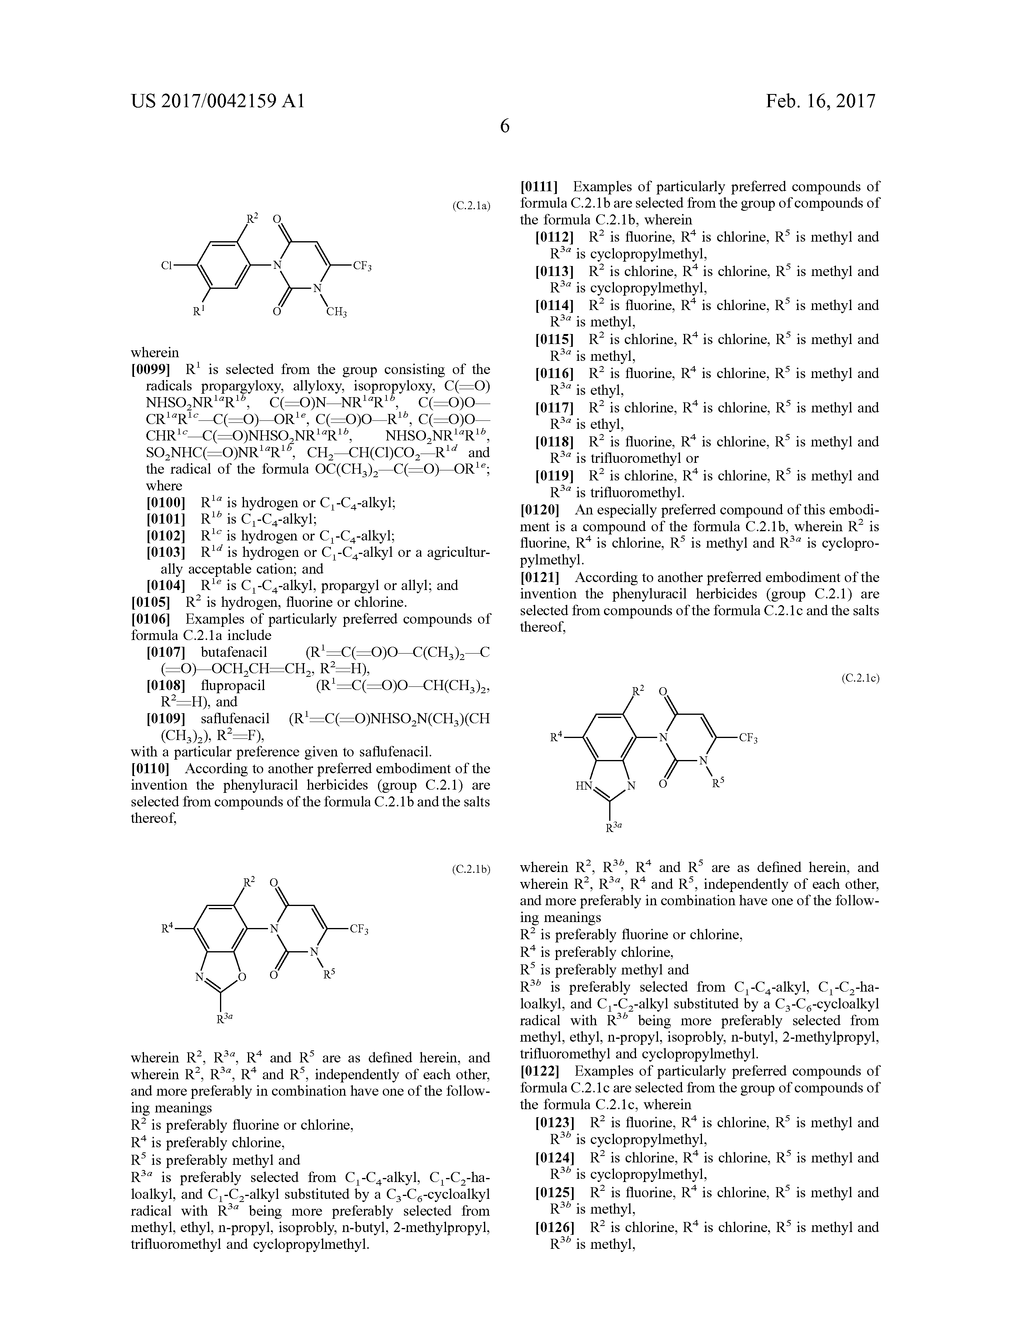 Herbicidal Composition Comprising Glyphosate, Glufosinate or Their Salts - diagram, schematic, and image 07